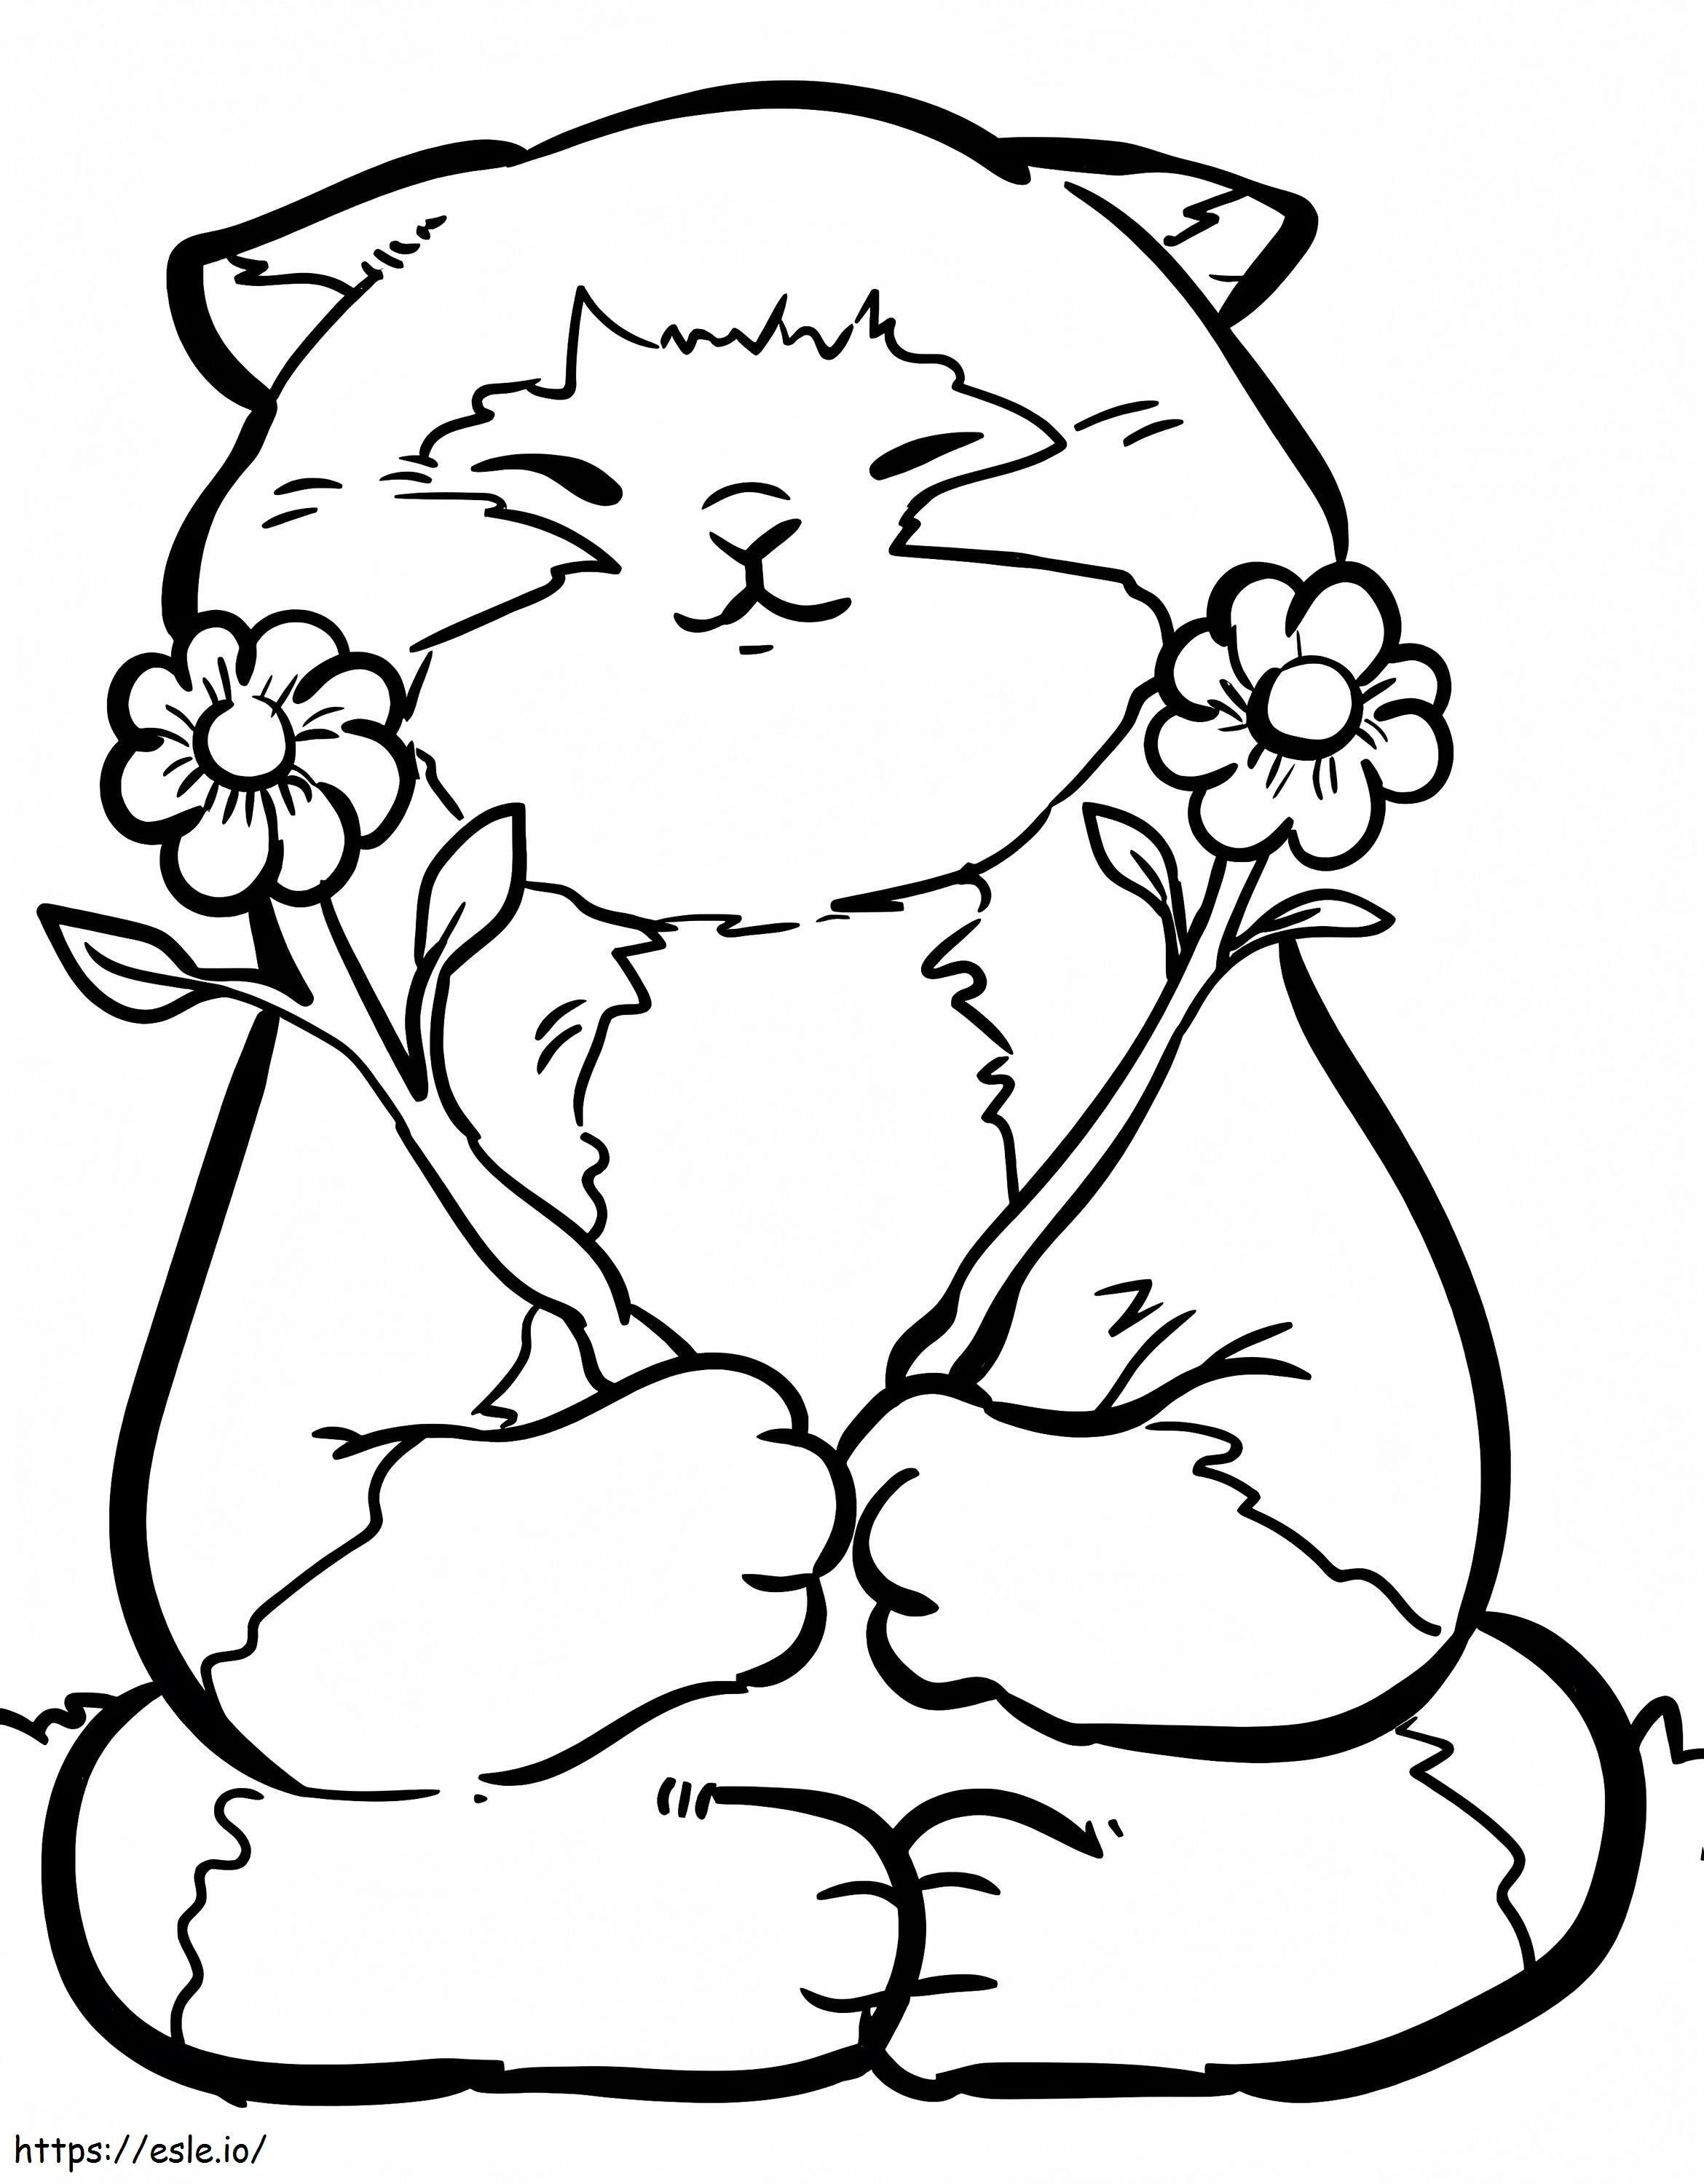 Cute Kitten 2 coloring page